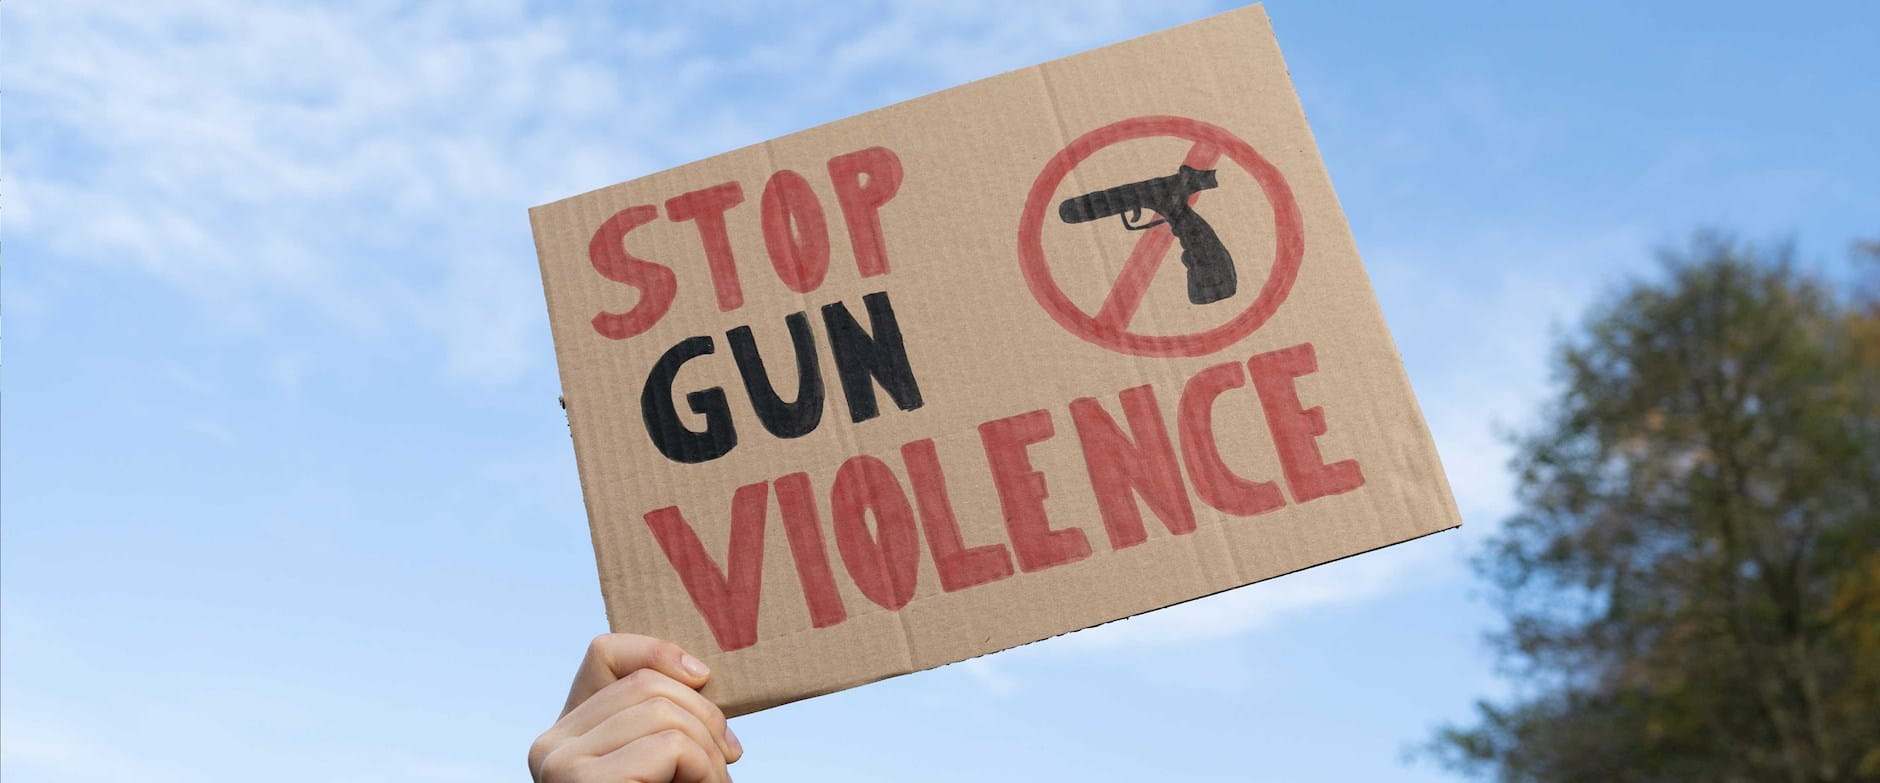 Hand holding a sign that says, "Stop gun violence"